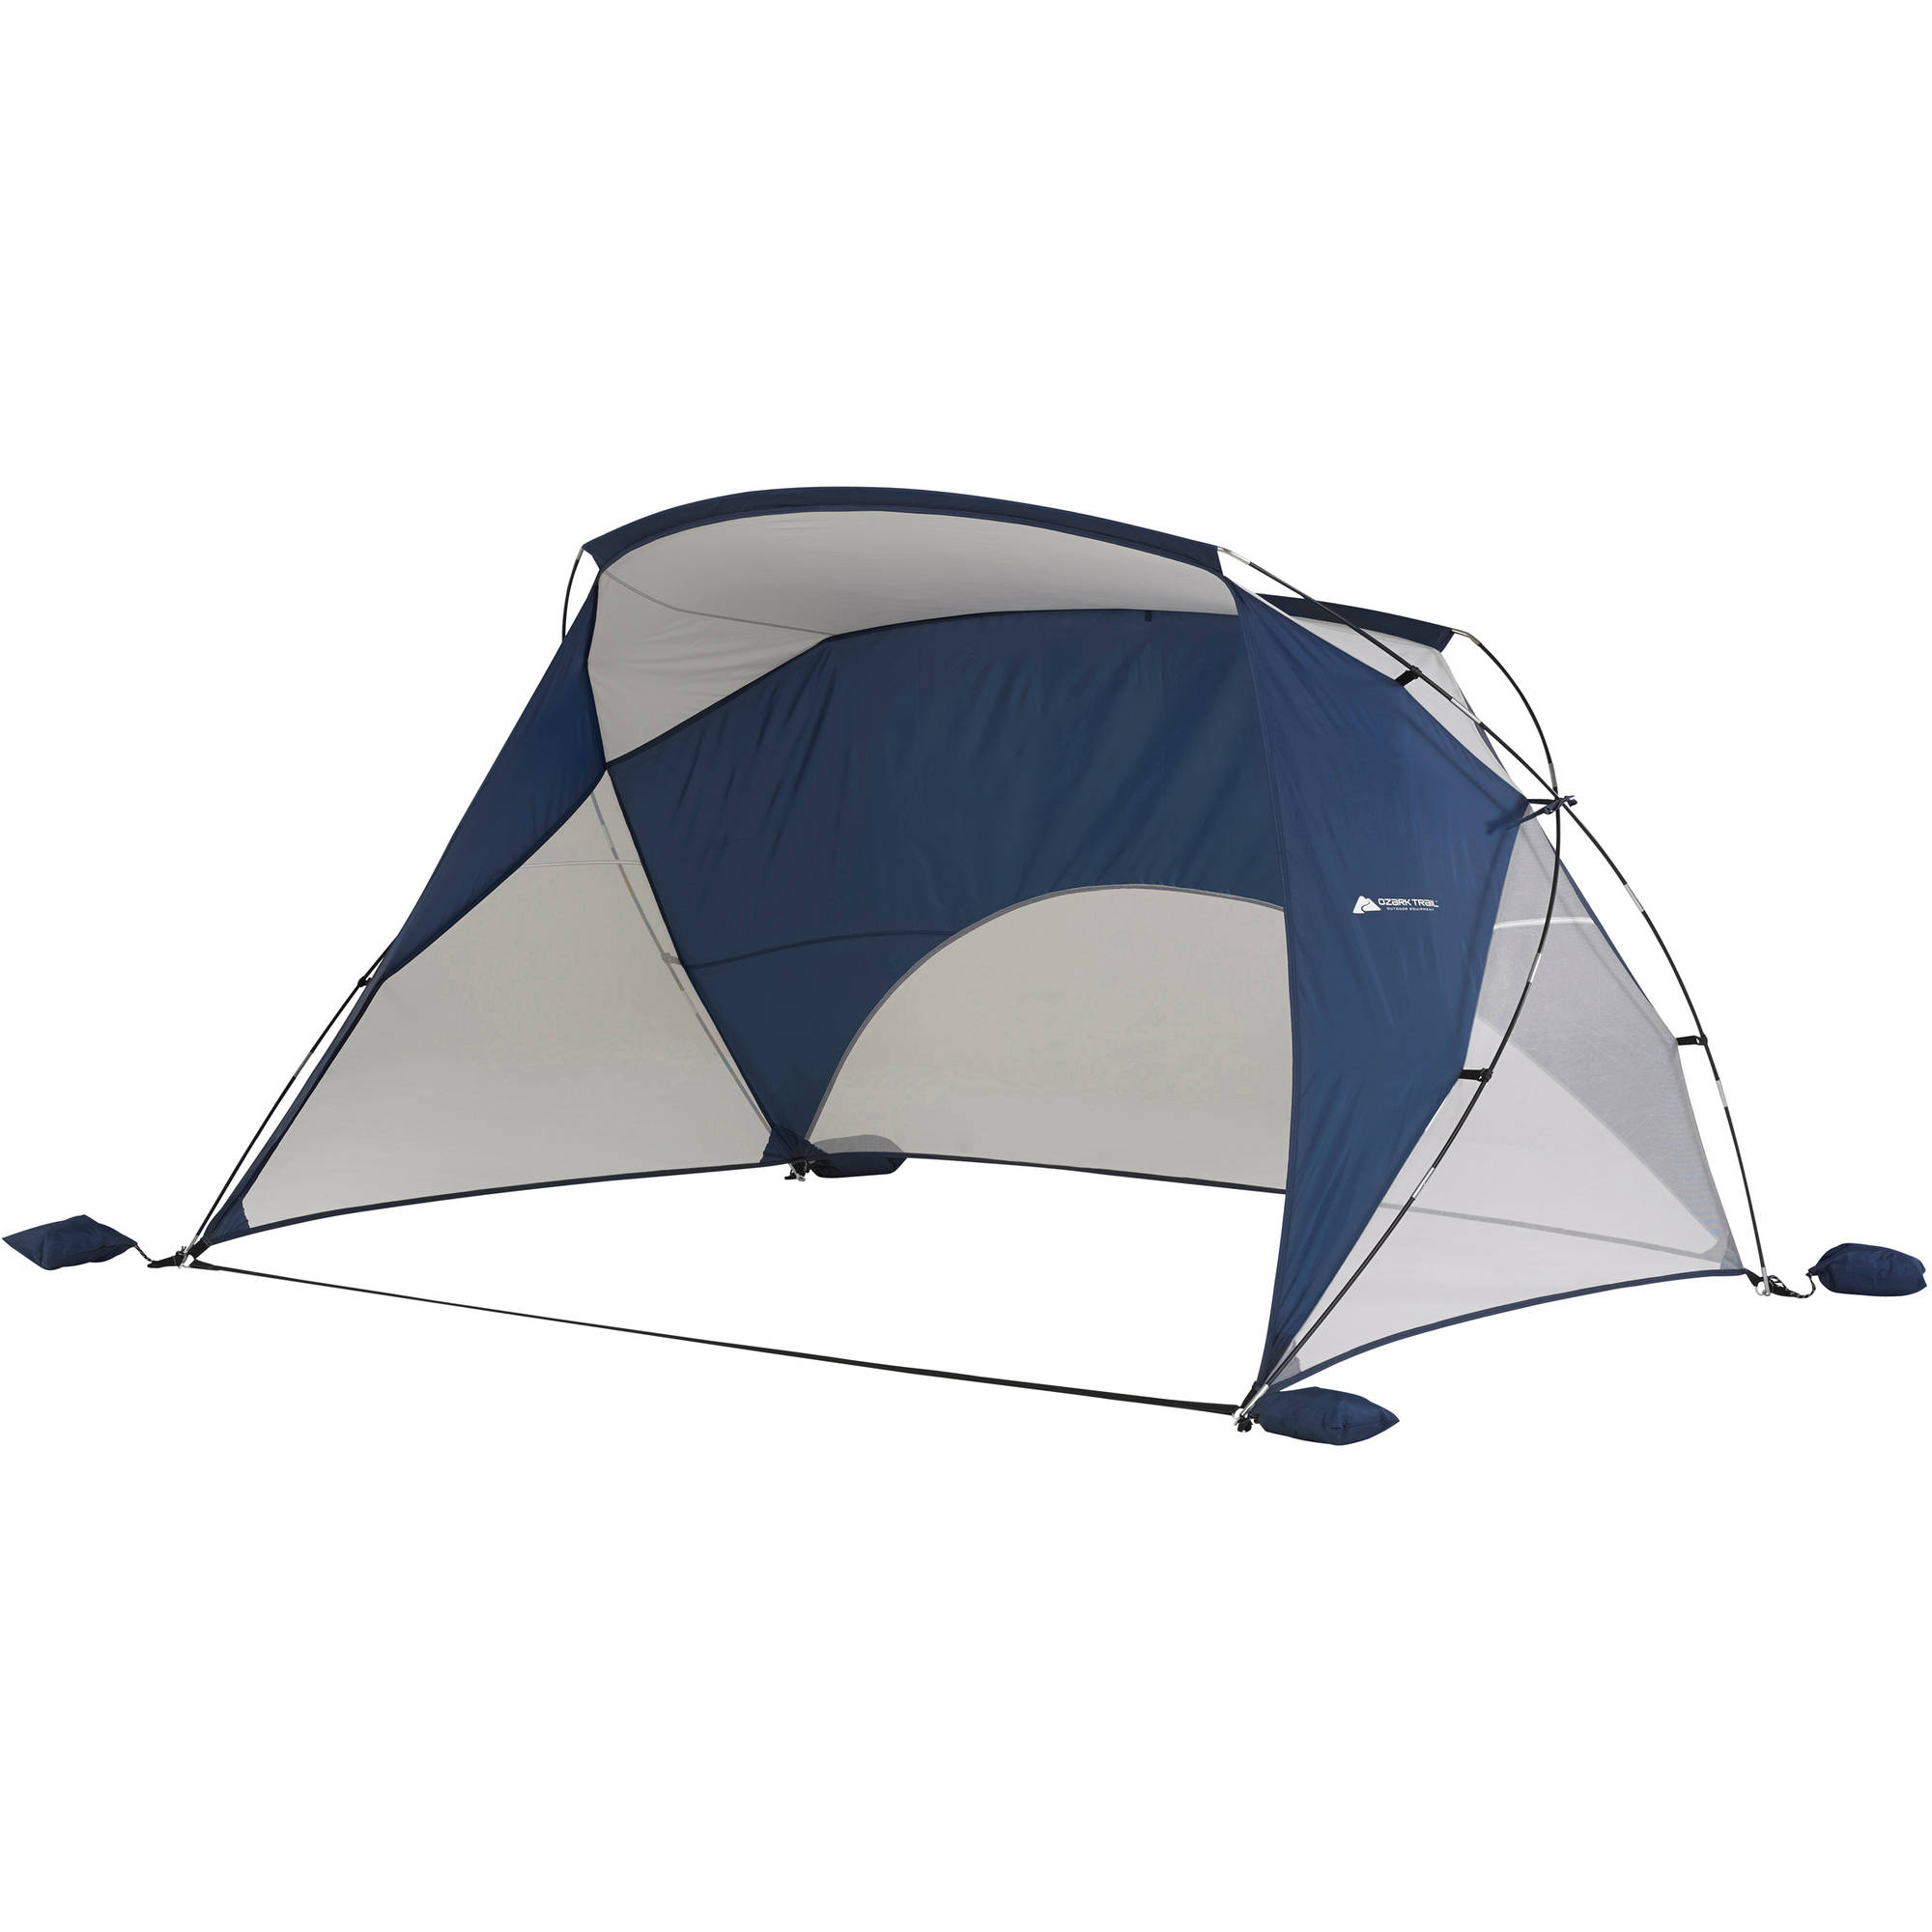 Ozark Trail 8 ft. x 6 ft. Portable Sun Shelter Beach Tent, with UV Protection - image 1 of 4